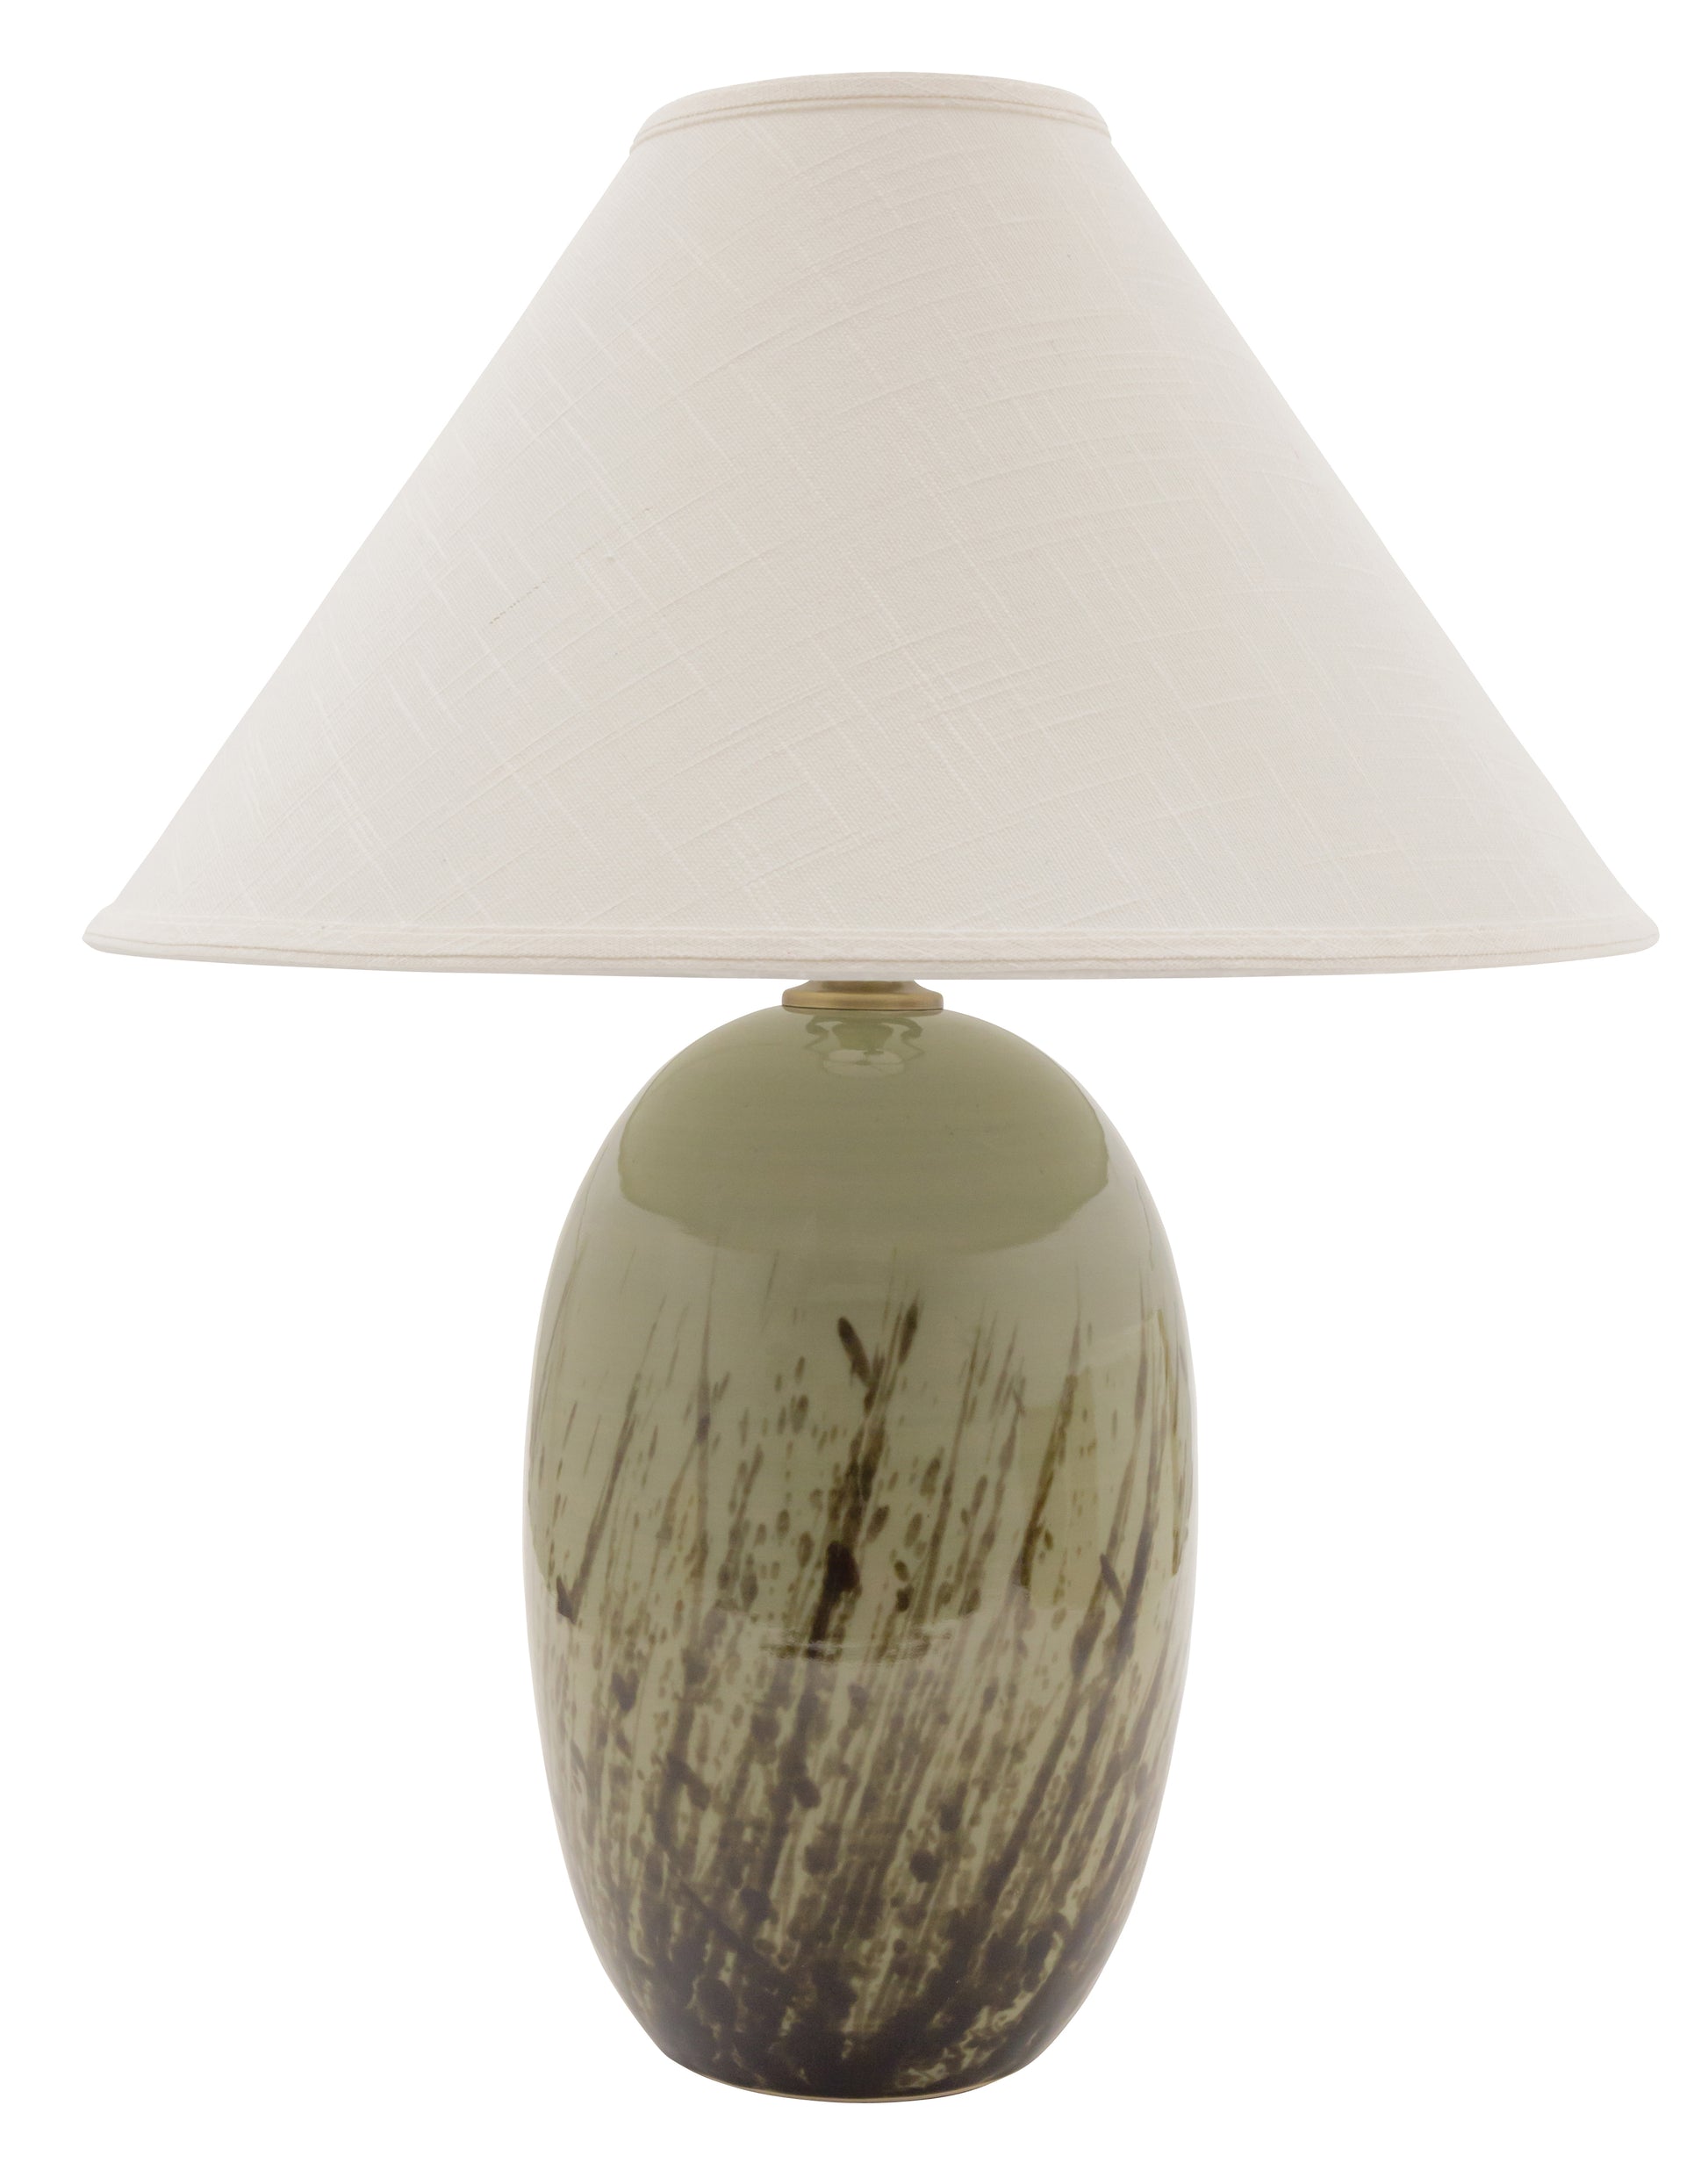 House of Troy Scatchard 28.5" Stoneware Table Lamp in Decorated Celadon GS150-DCG